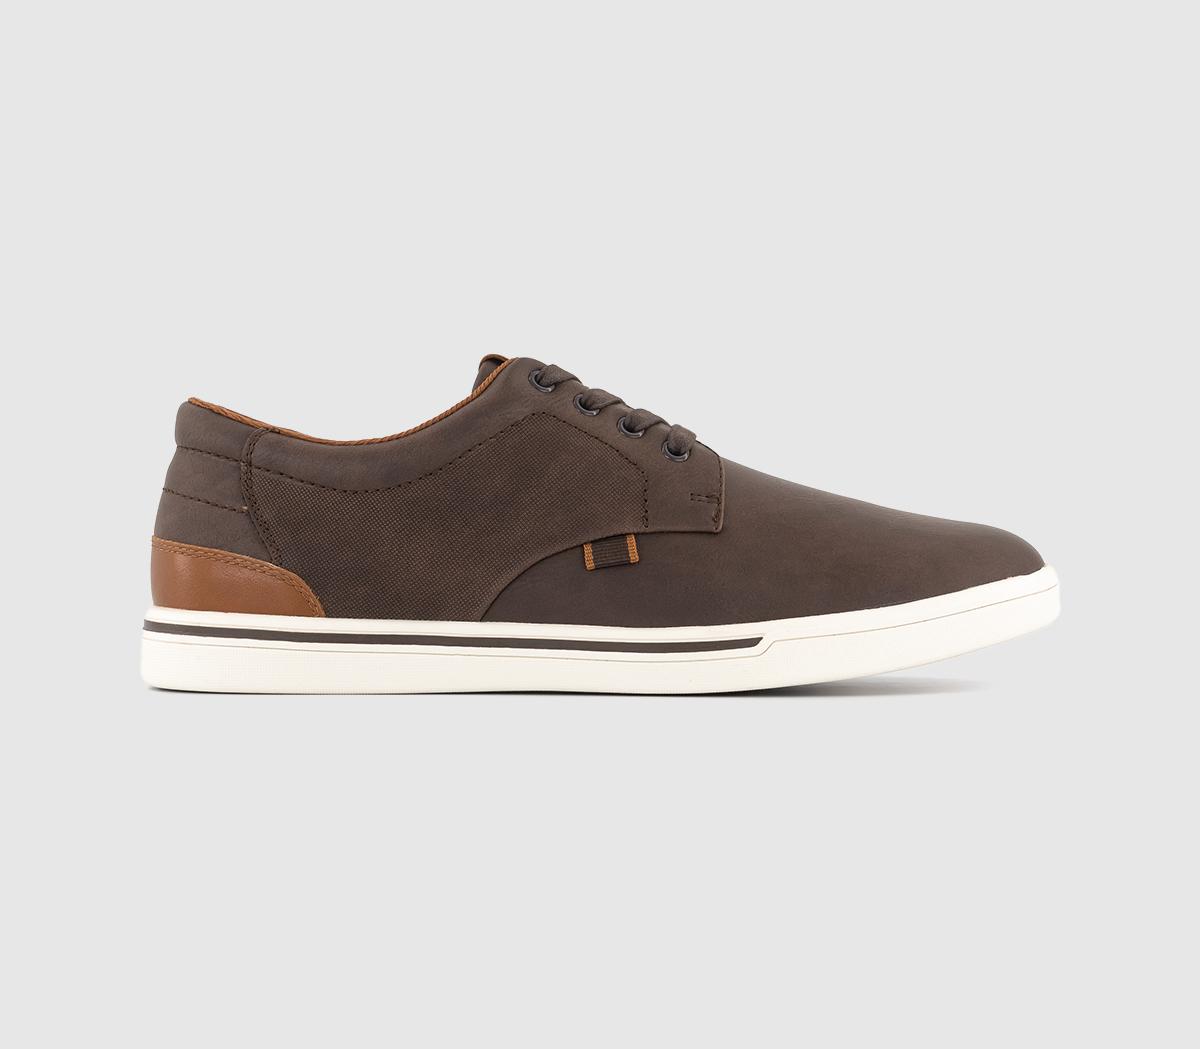 OFFICECasey Perforated Lace Up ShoesBrown